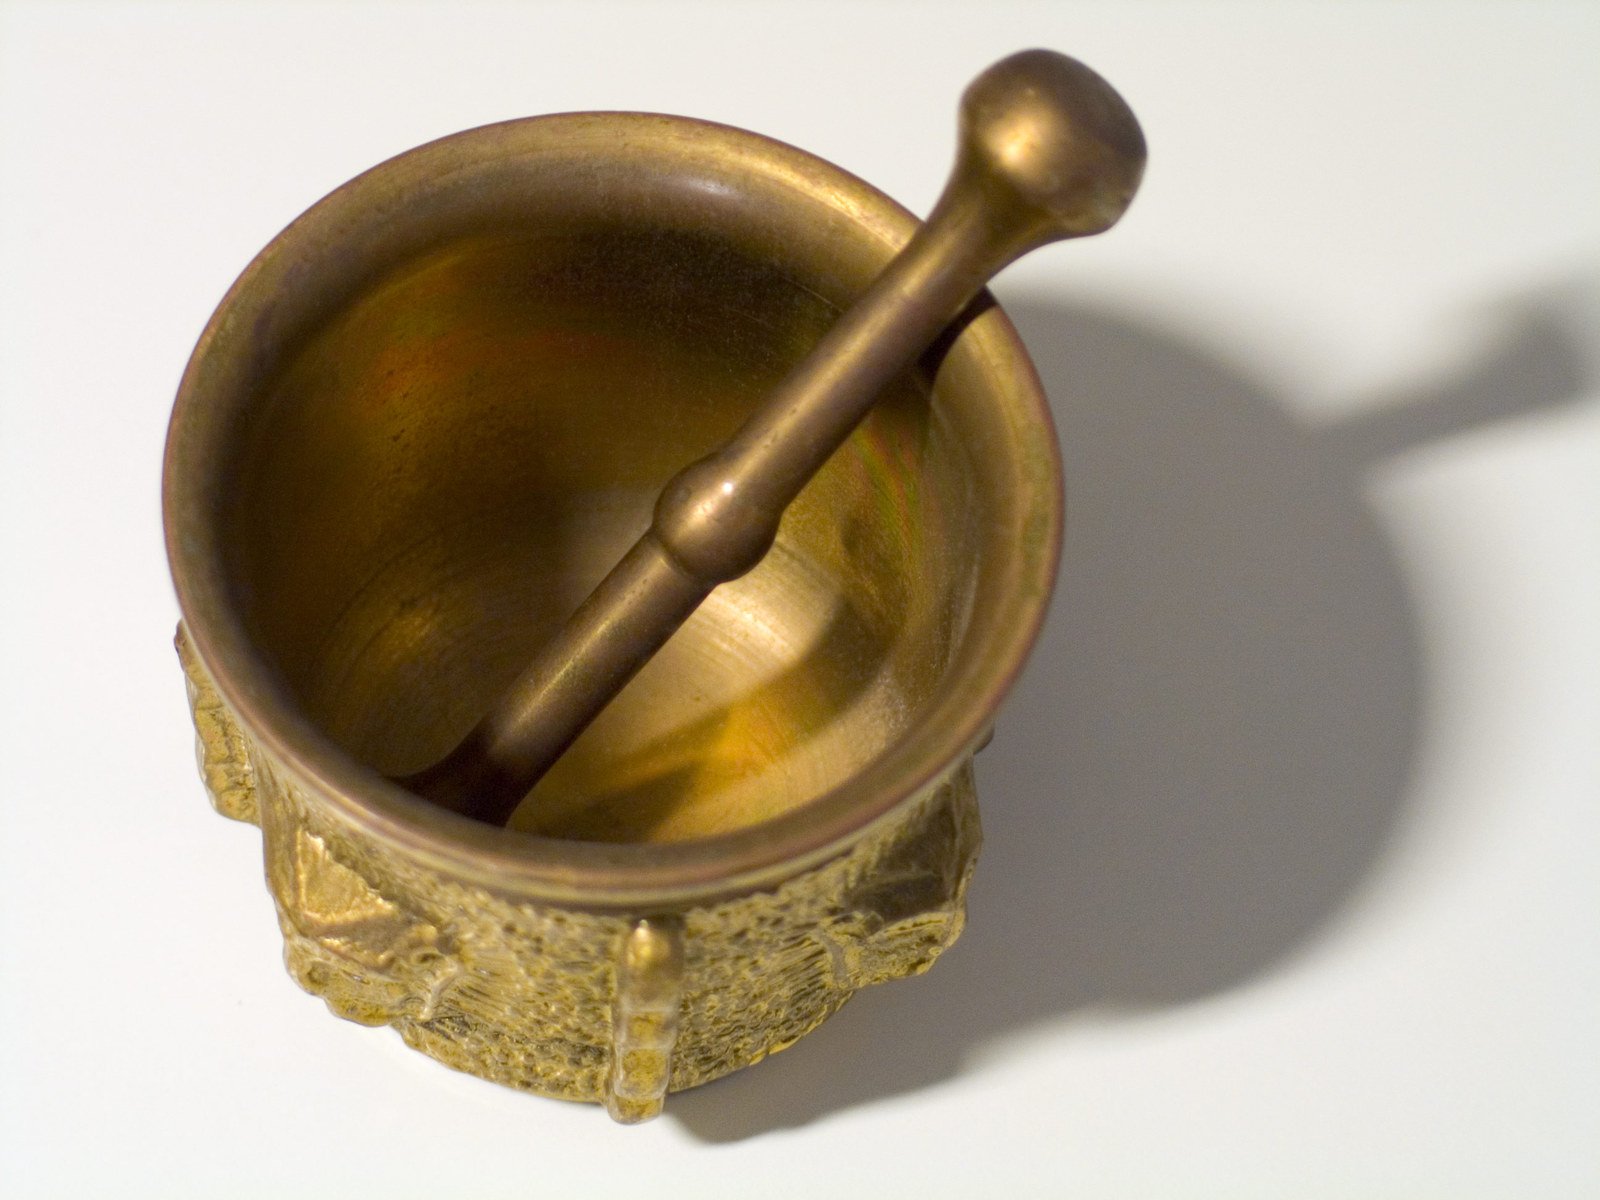 a gold bowl and two spoons, on a white surface